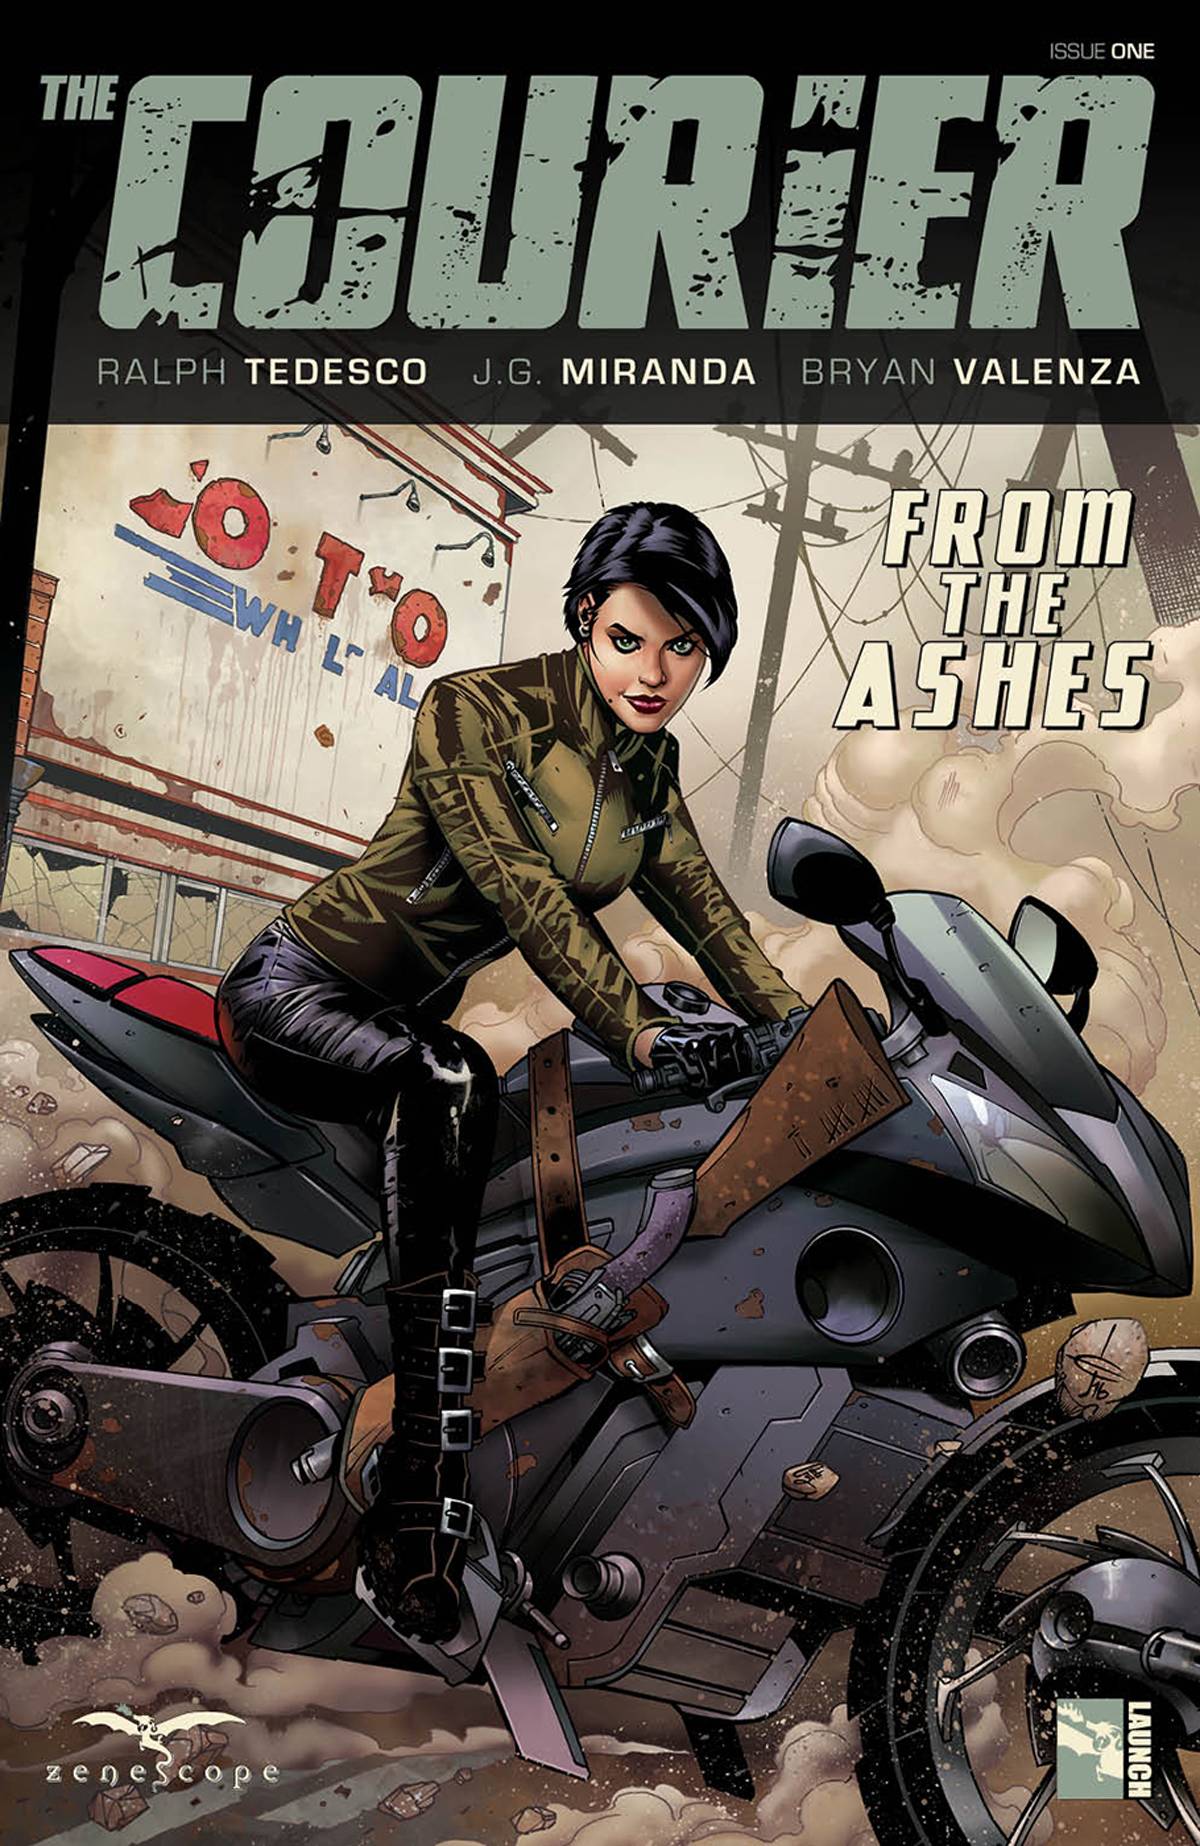 COURIER VOL 01 THROUGH THE ASHES TP